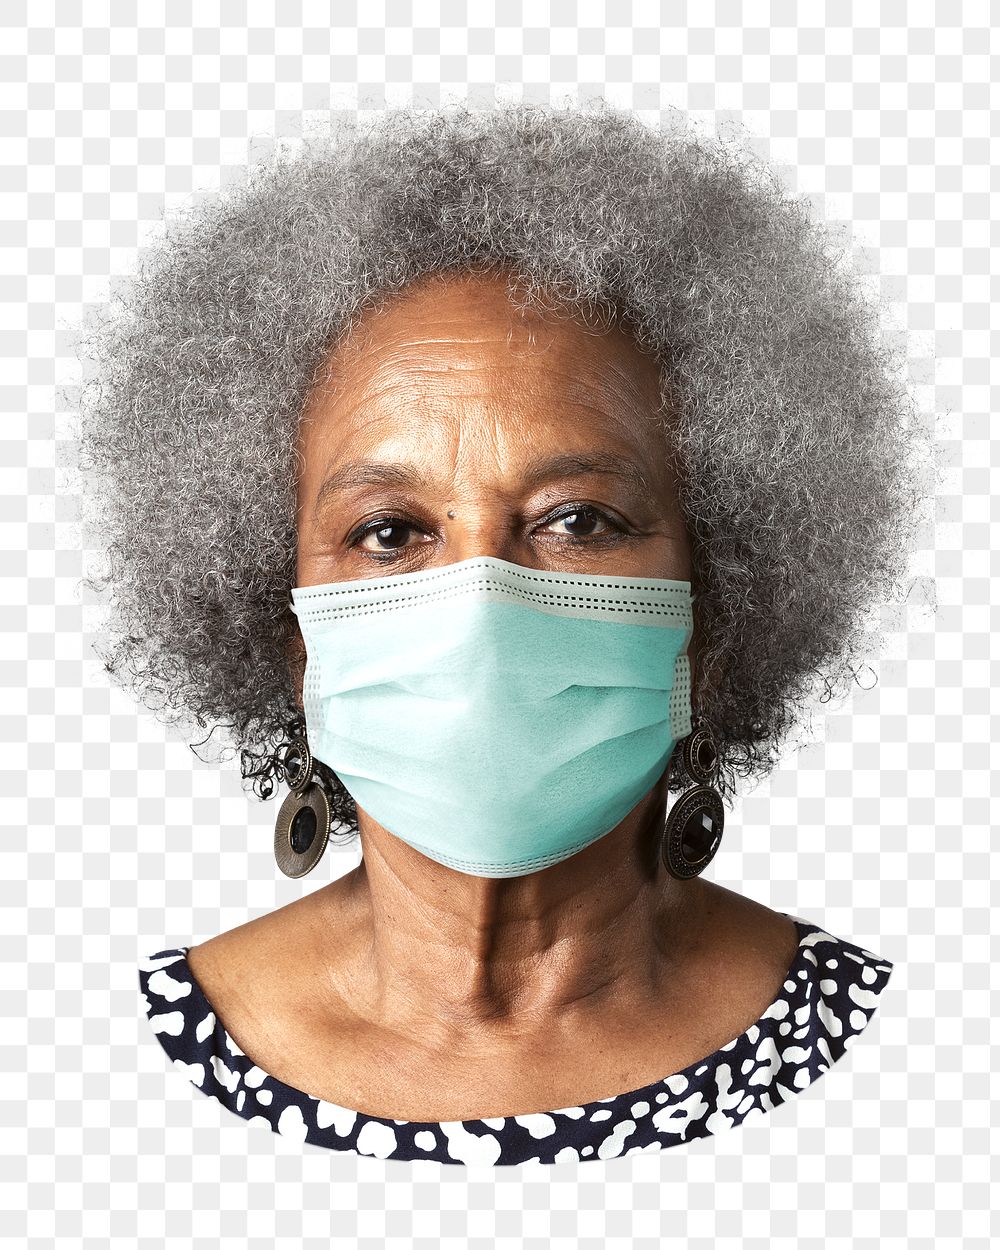 Mature woman png wearing mask, transparent background